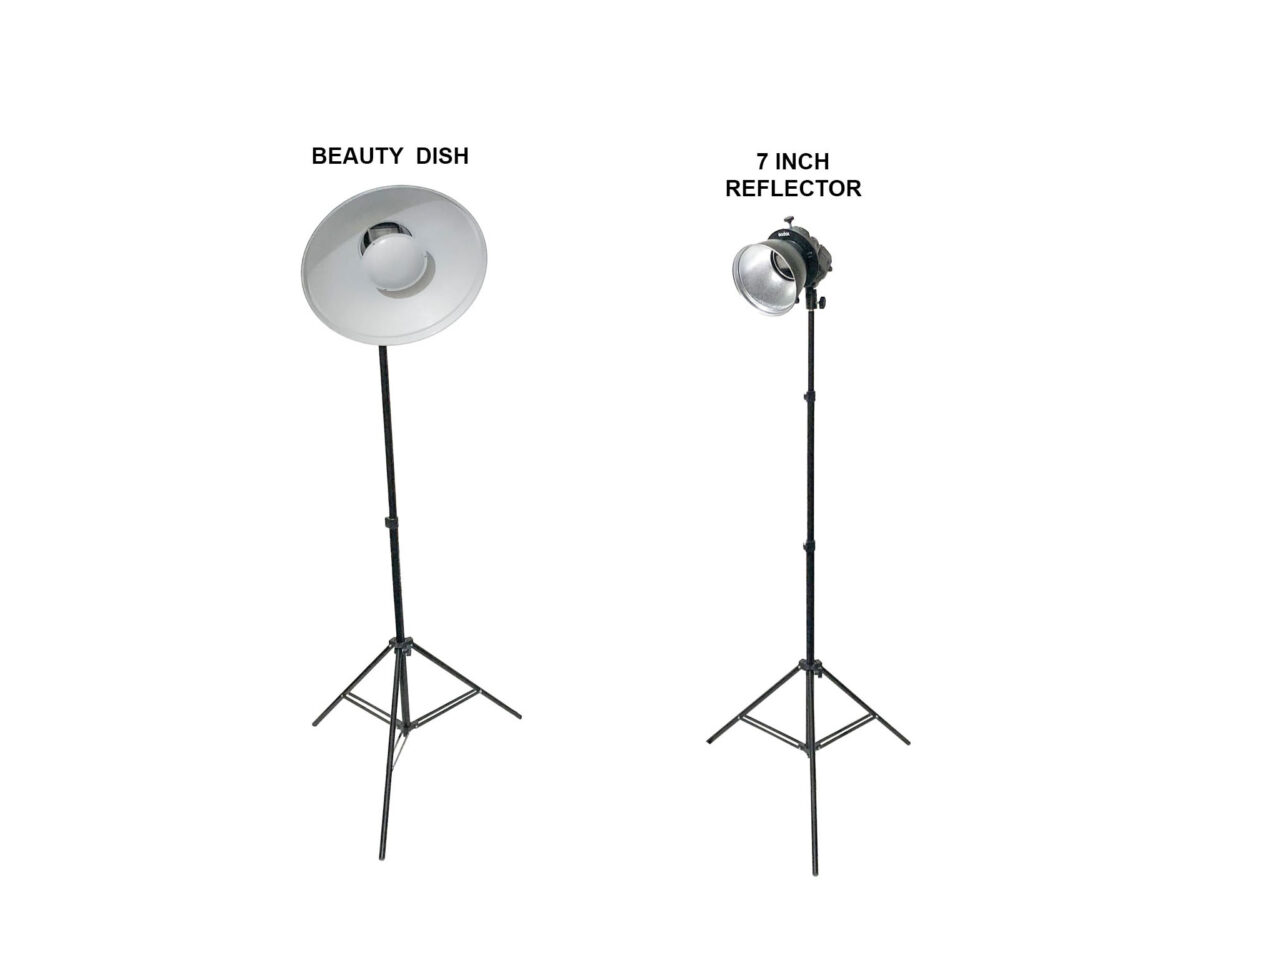 The Complete Guide to Paramount Lighting. Beauty dish and 7-inch reflector on stands.